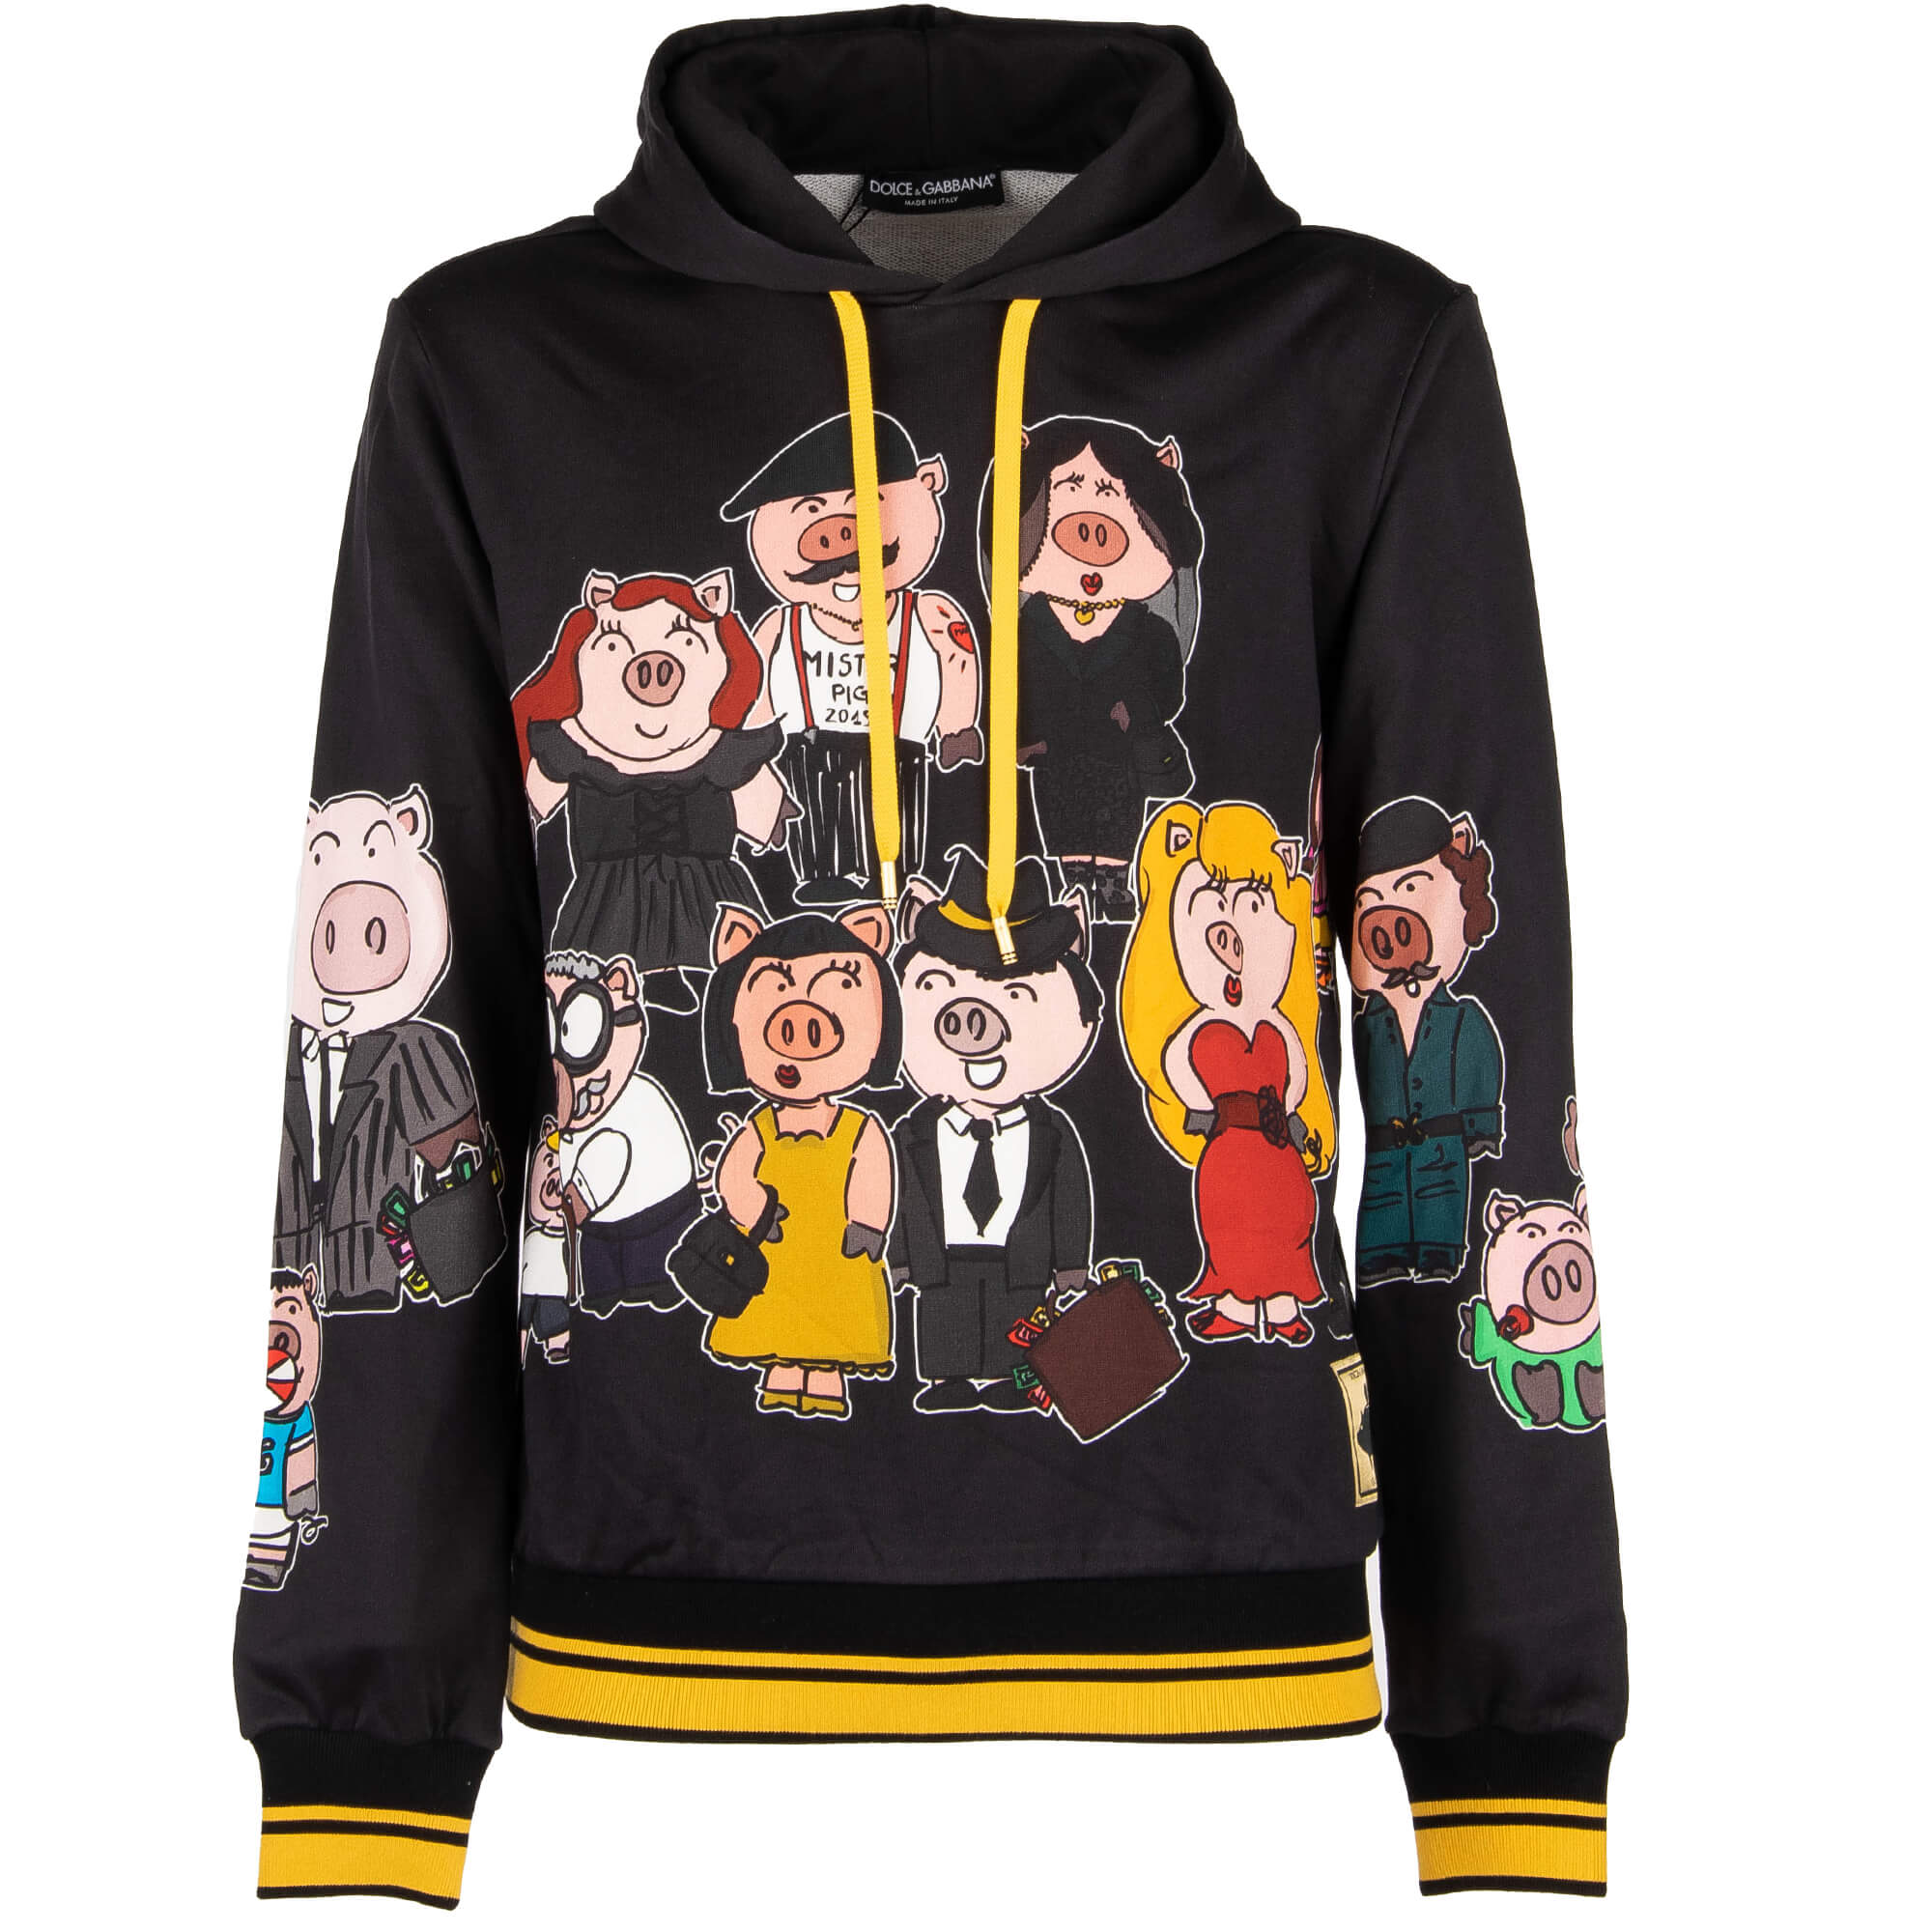 Dolce & Gabbana Hoody Sweater with Money Pig Family Print Black | FASHION  ROOMS